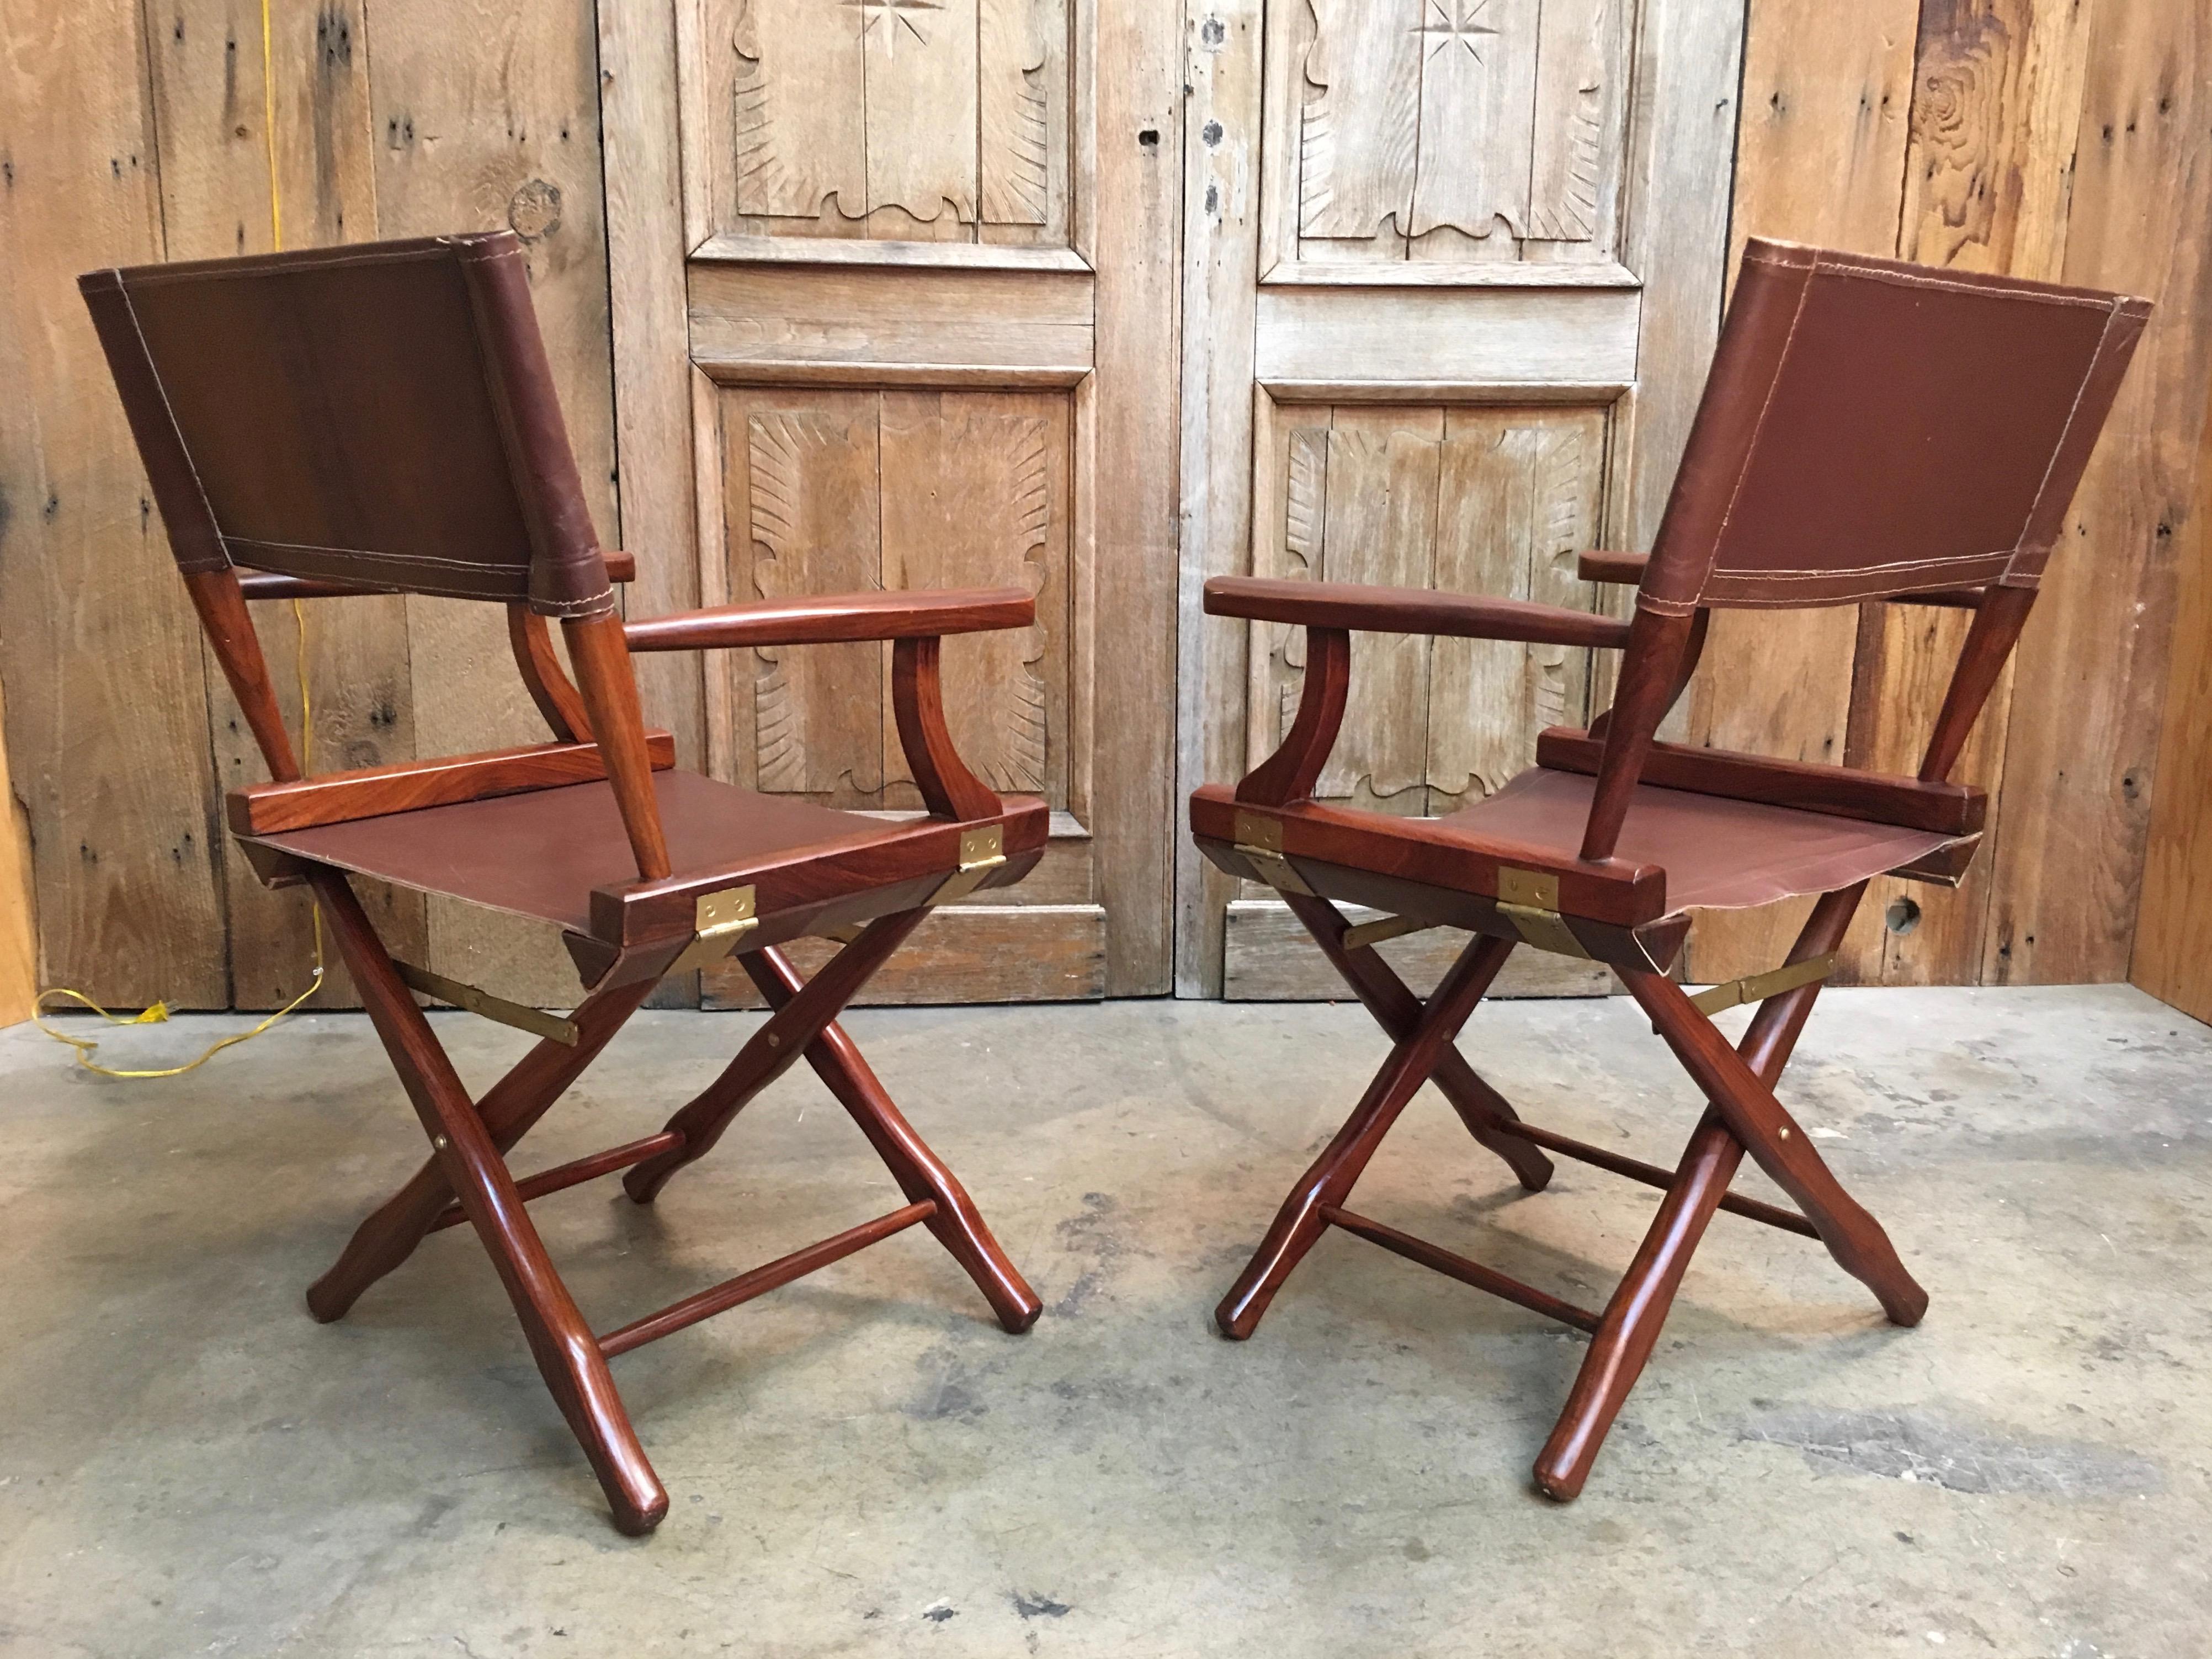 20th Century Leather Director Chairs by M. Hayat & Bros Ltd.